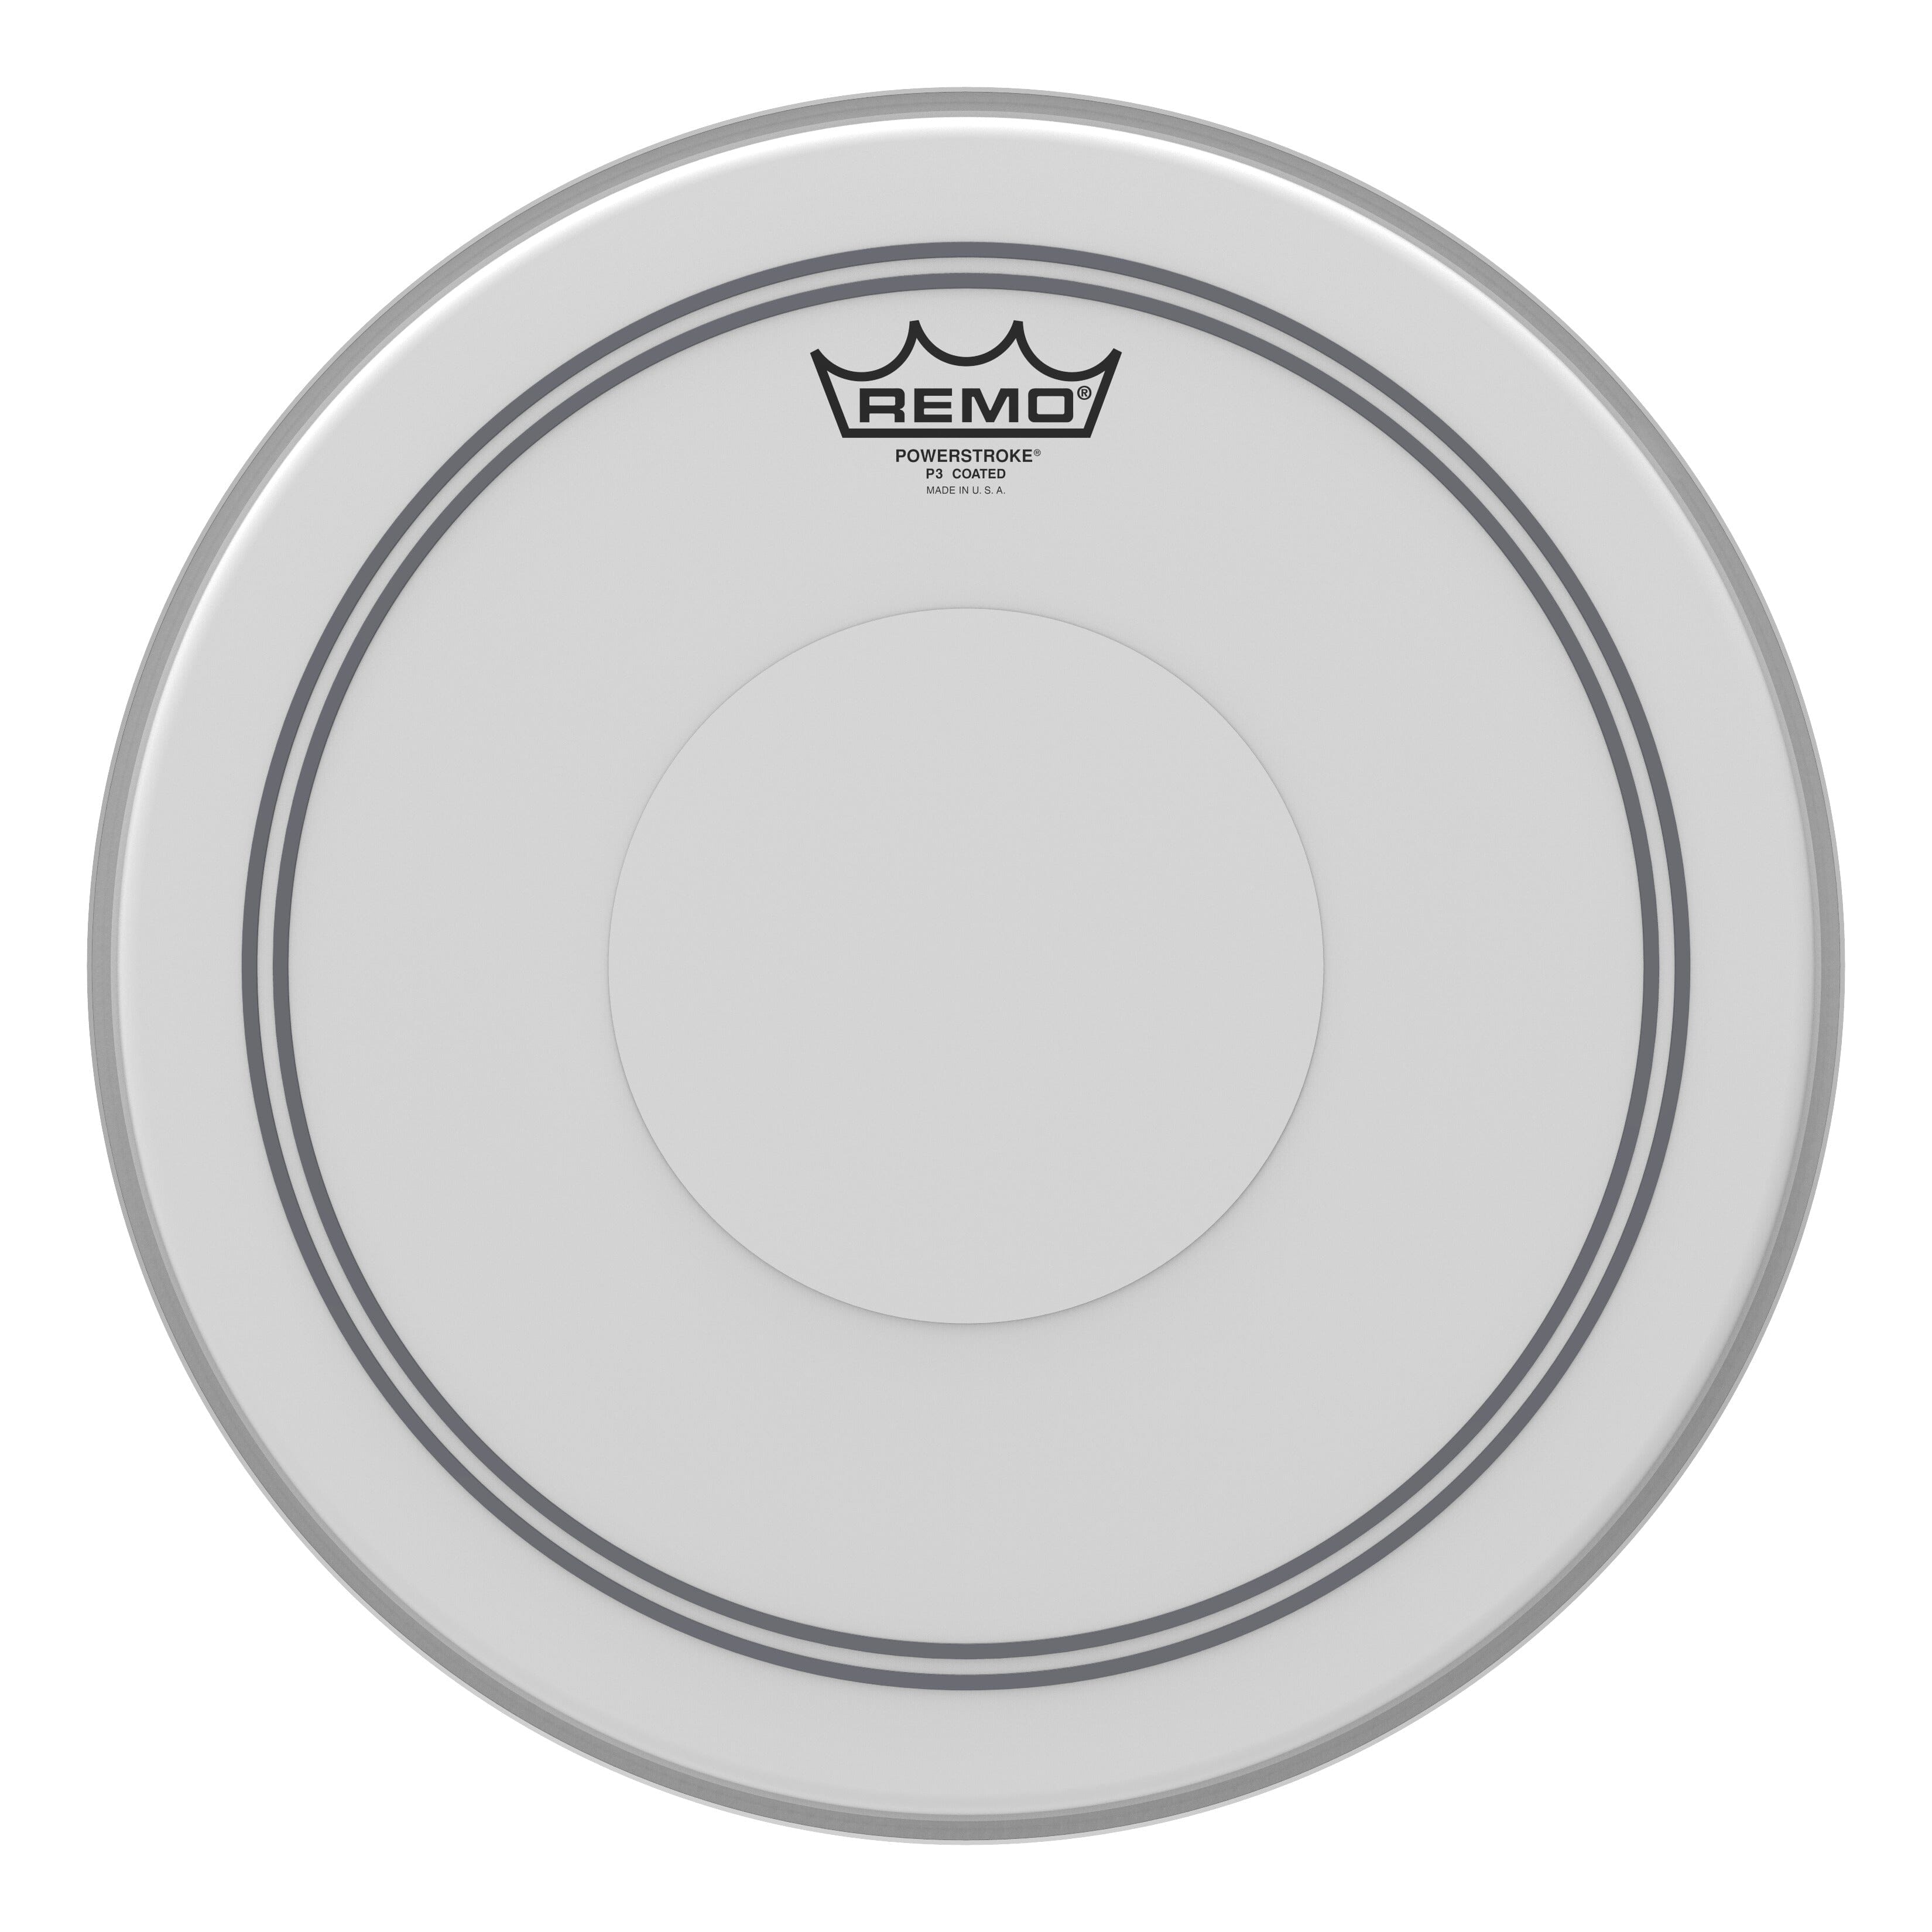 Remo 14" Powerstroke P3 Coated Drum Head With Clear Dot (P3-0114-C2) Drum Heads Remo 